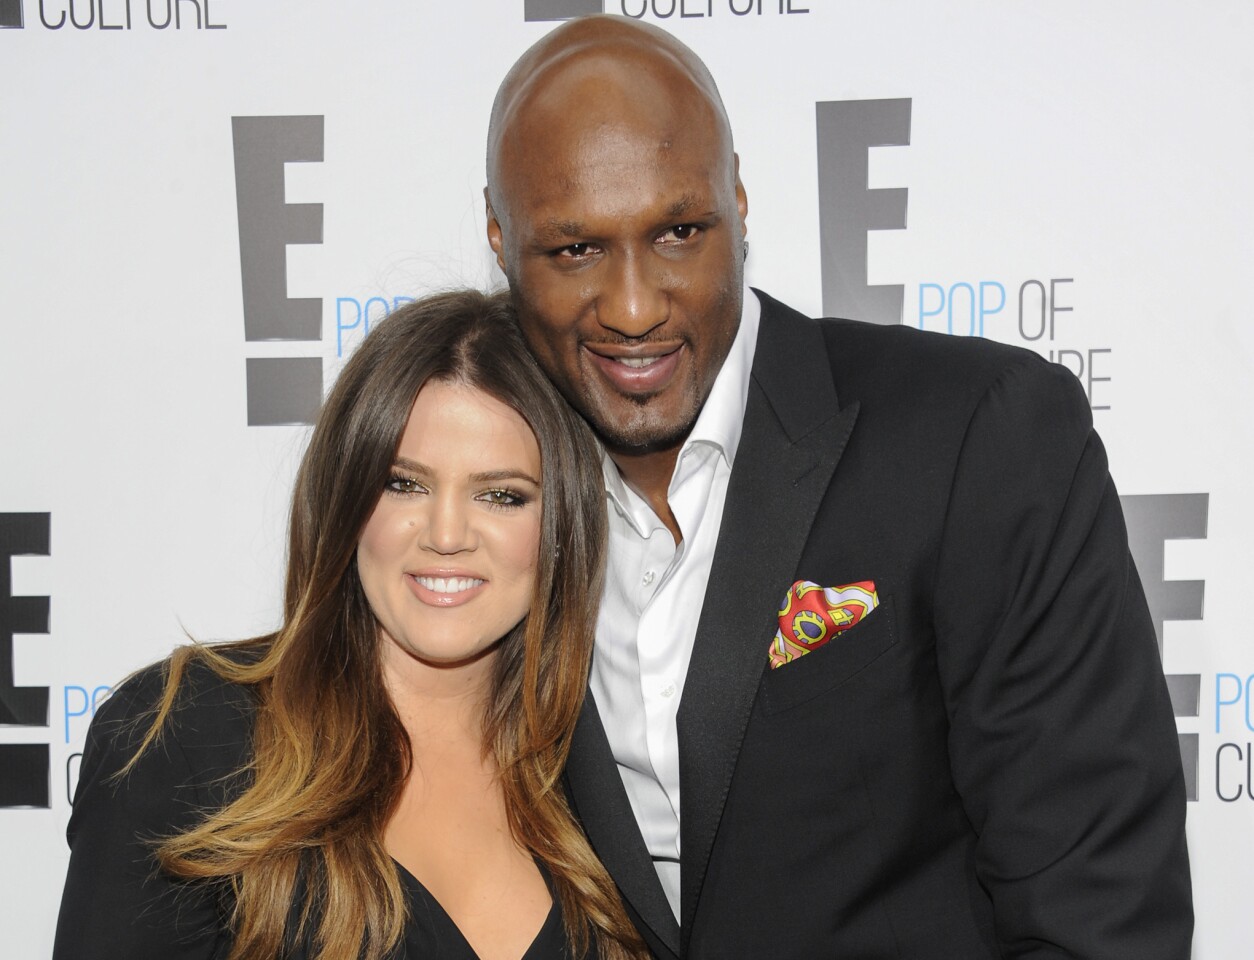 Lamar Odom made headlines when he and Khloe Kardashian married in September 2009 after only a month of dating. In December 2013, they announced they were divorcing after allegations of drug use and cheating plagued the couple.